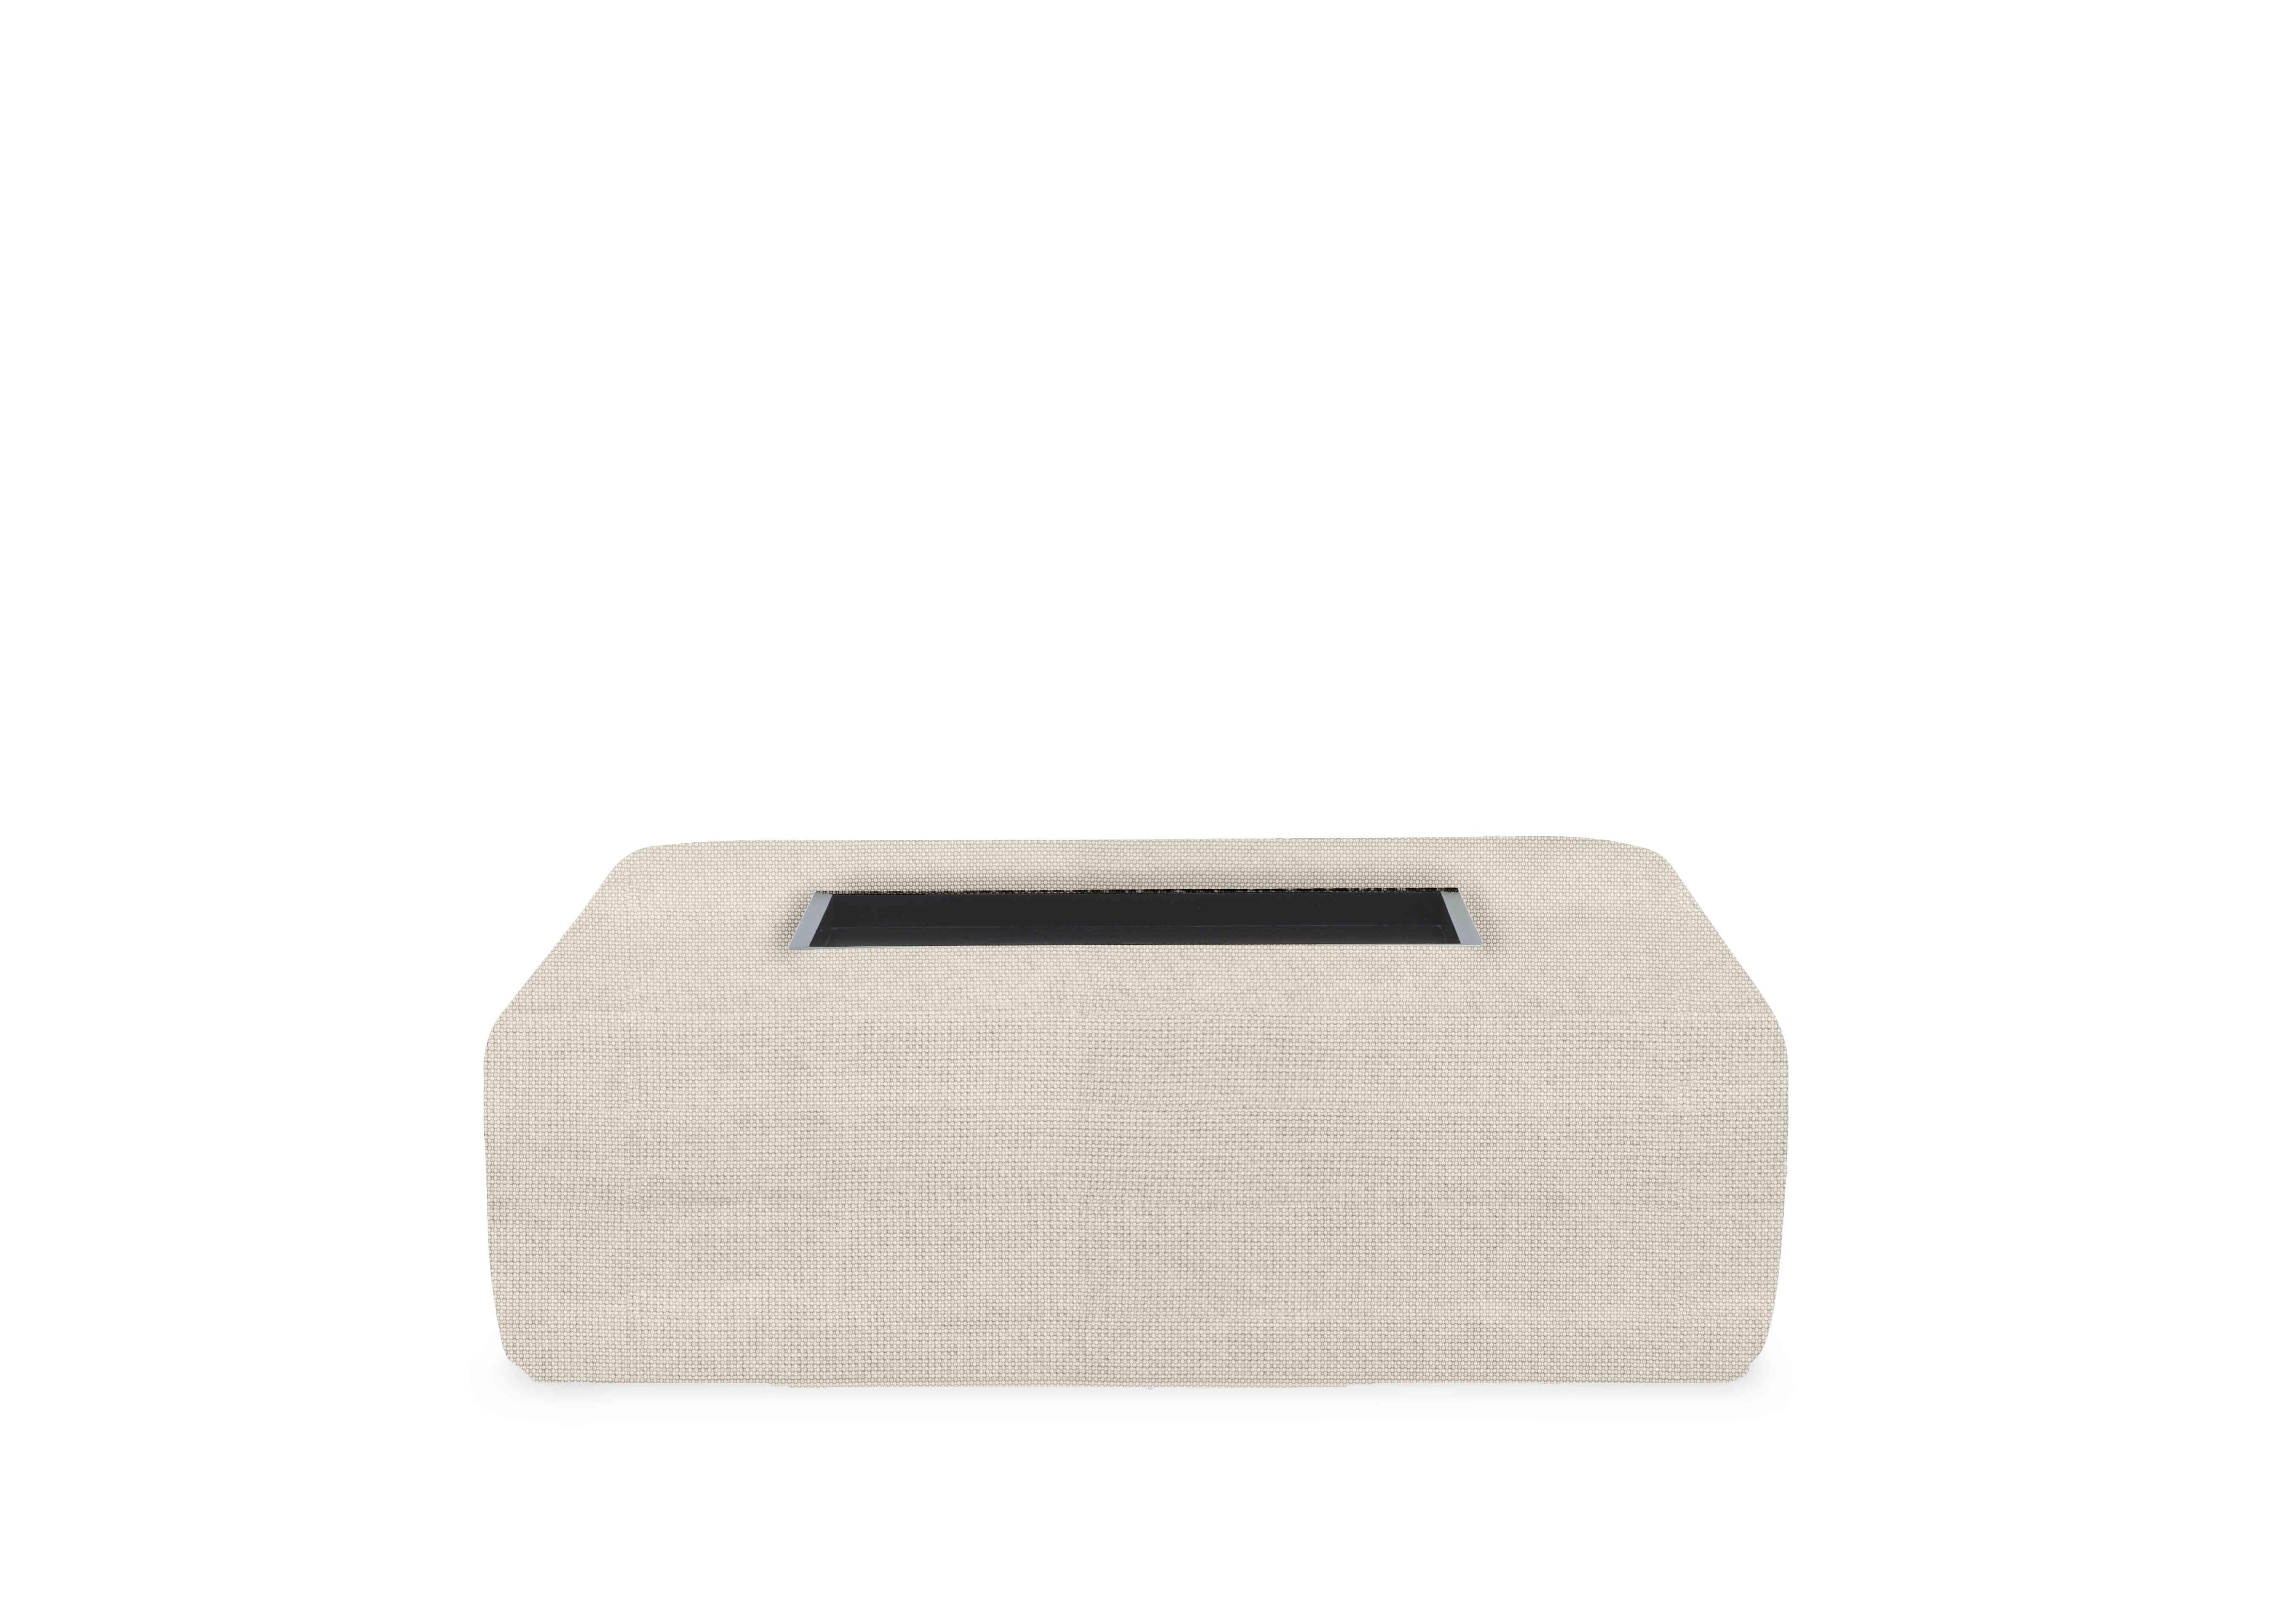 Celine Rectangular Footstool with Wooden Tray in Dice Natural Eb Sp on Furniture Village